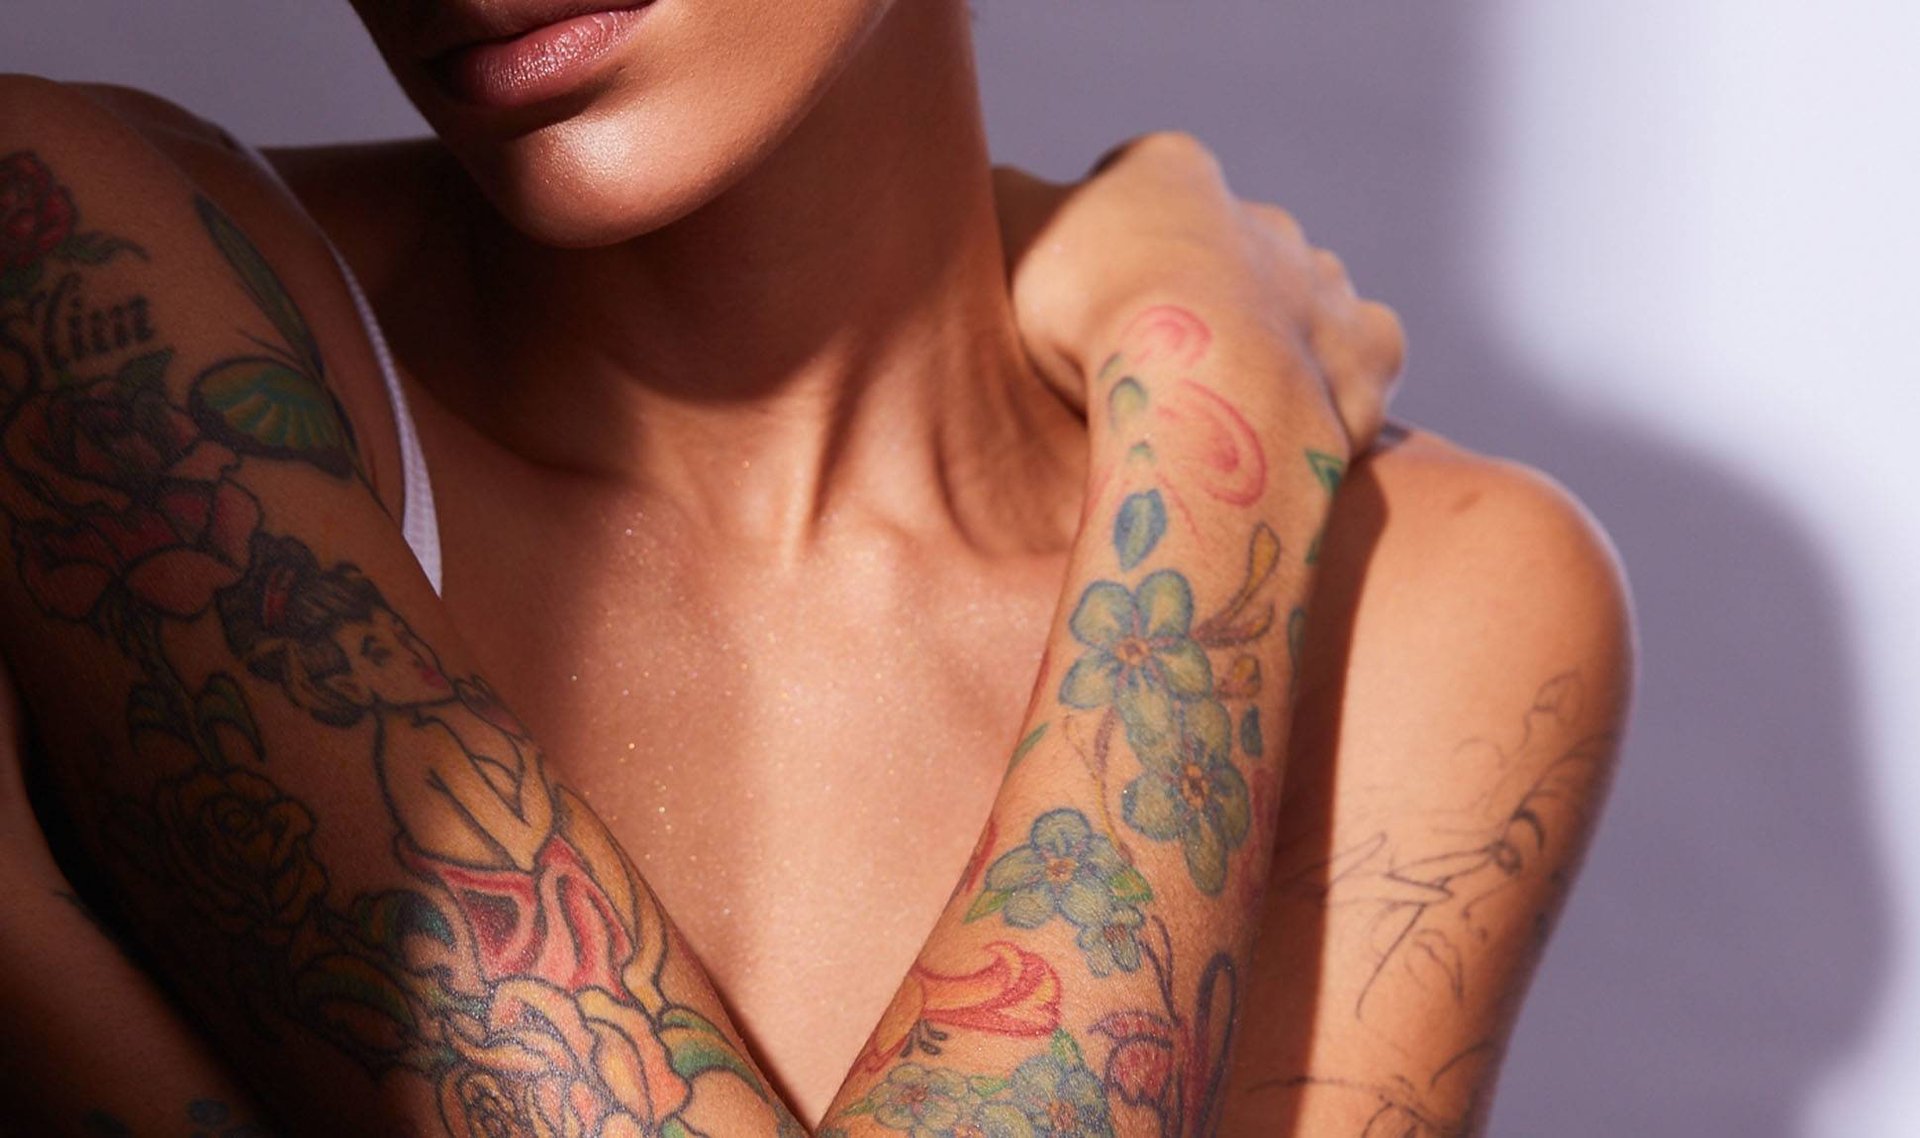 Dry Healing vs. Wrap Healing Your Tattoo: Which Is Best for You?